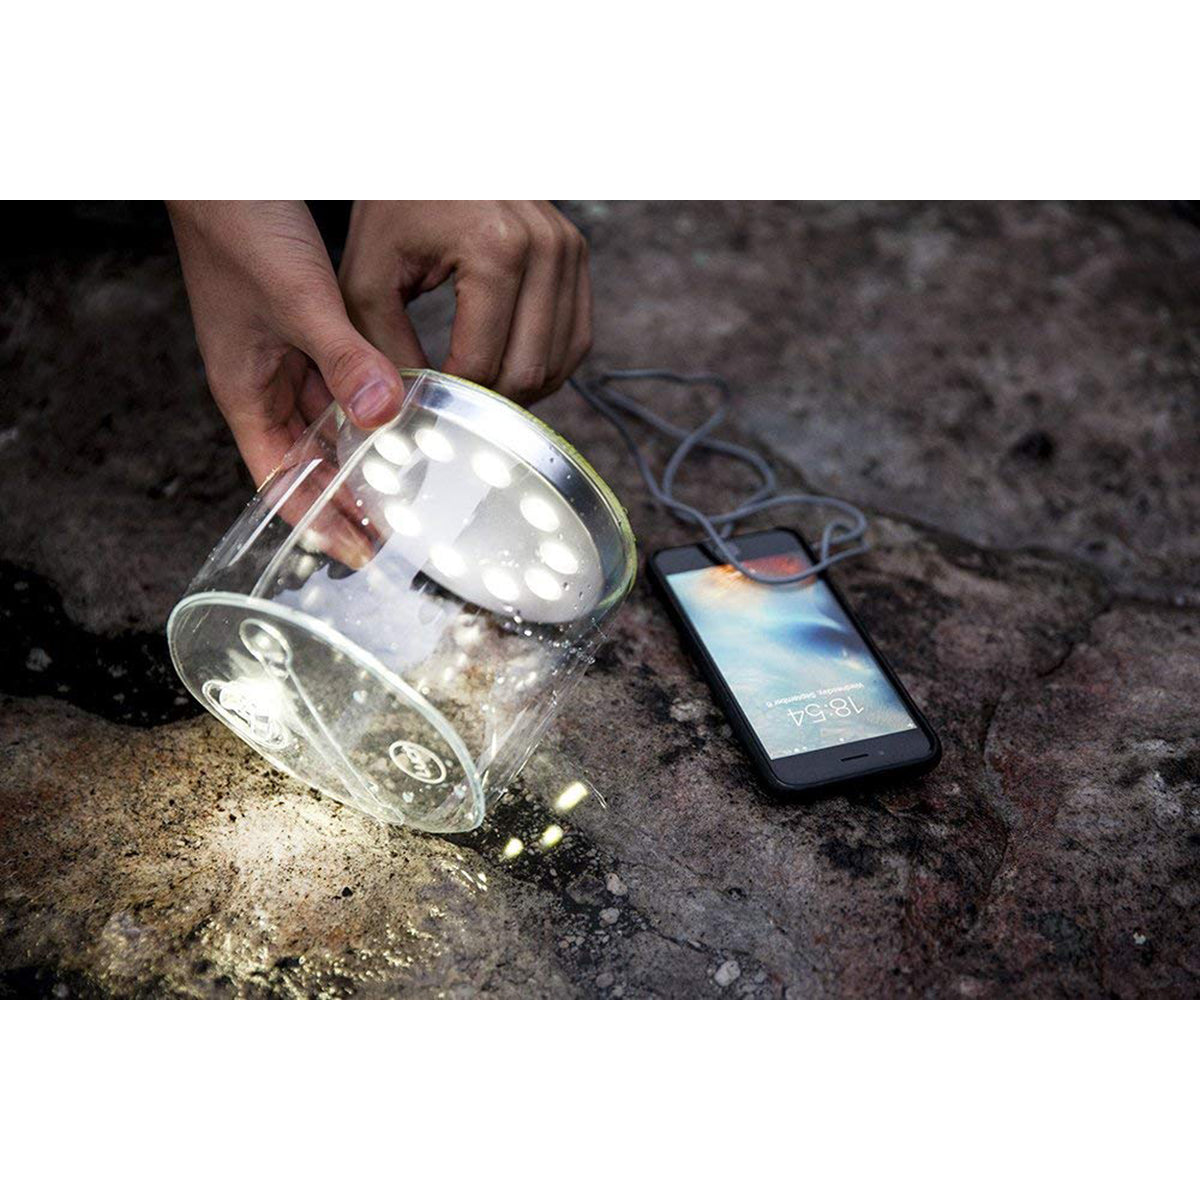 MPOWERD Luci Pro Outdoor 2.0 Waterproof Inflatable Solar Light w/ Mobile Charger MPOWERD